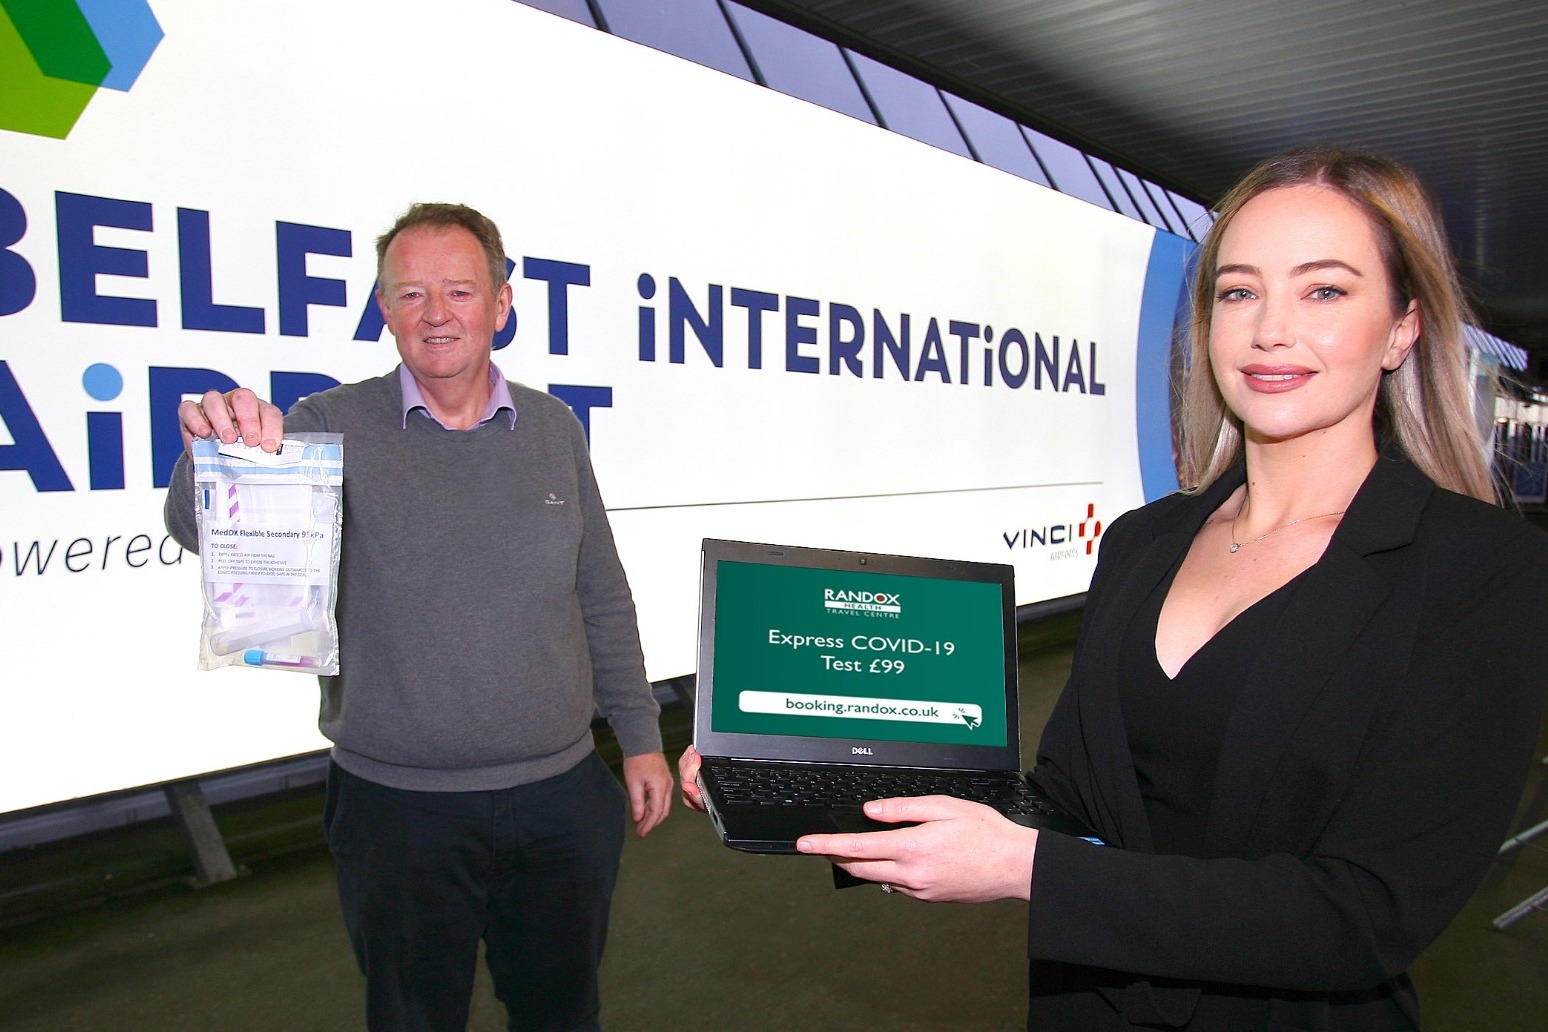 Walk-in testing facility opened at Belfast International Airport 